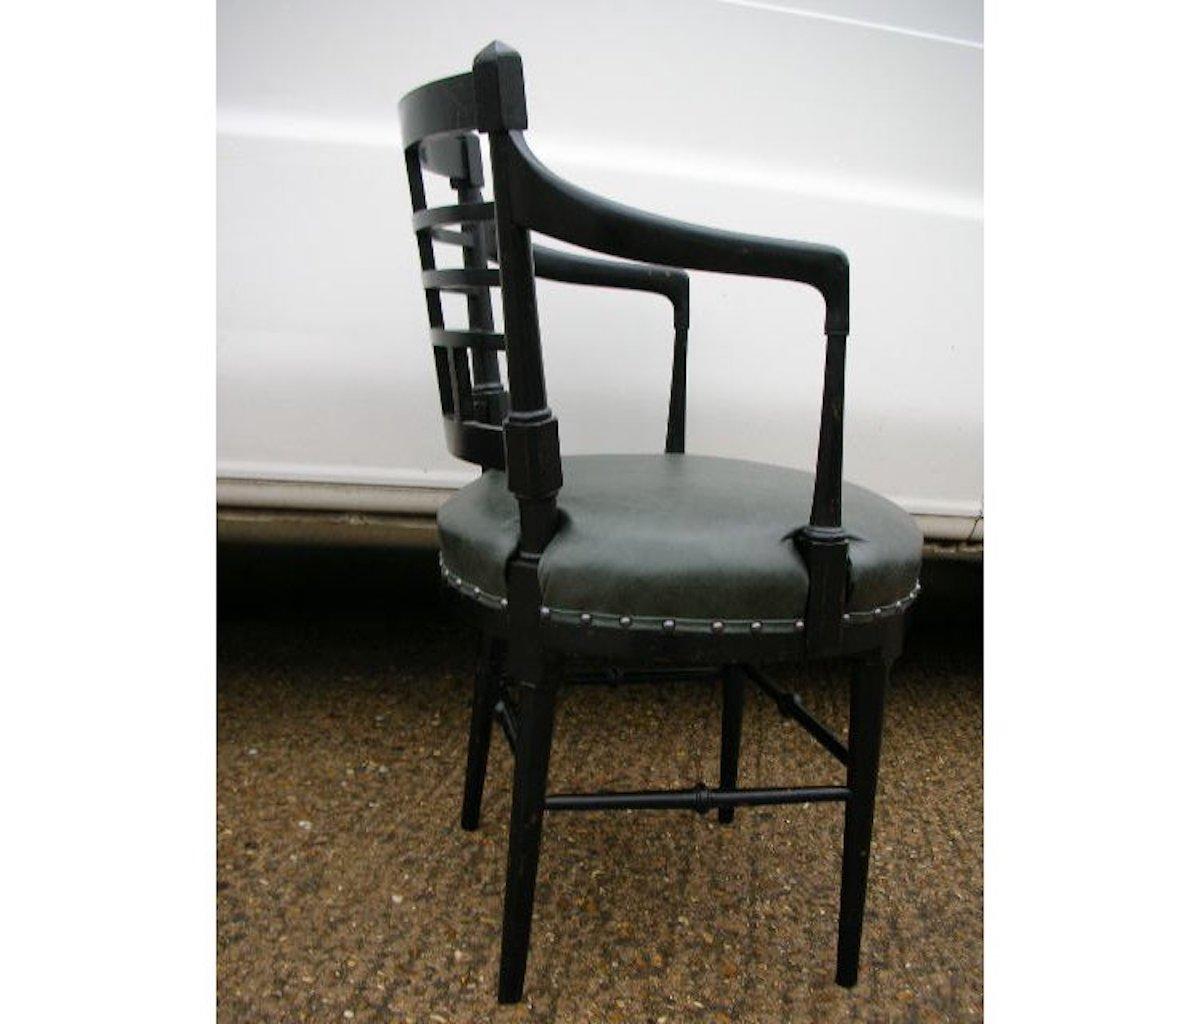 An Aesthetic Movement Jacobean or Old English ebonized armchair.
After a design by E. W. Godwin.
Probably made by C J Plunkett & Co. See The Secular Furniture of E W Godwin by Susan Weber Soros page 256.
Professionally reupholstered in quality